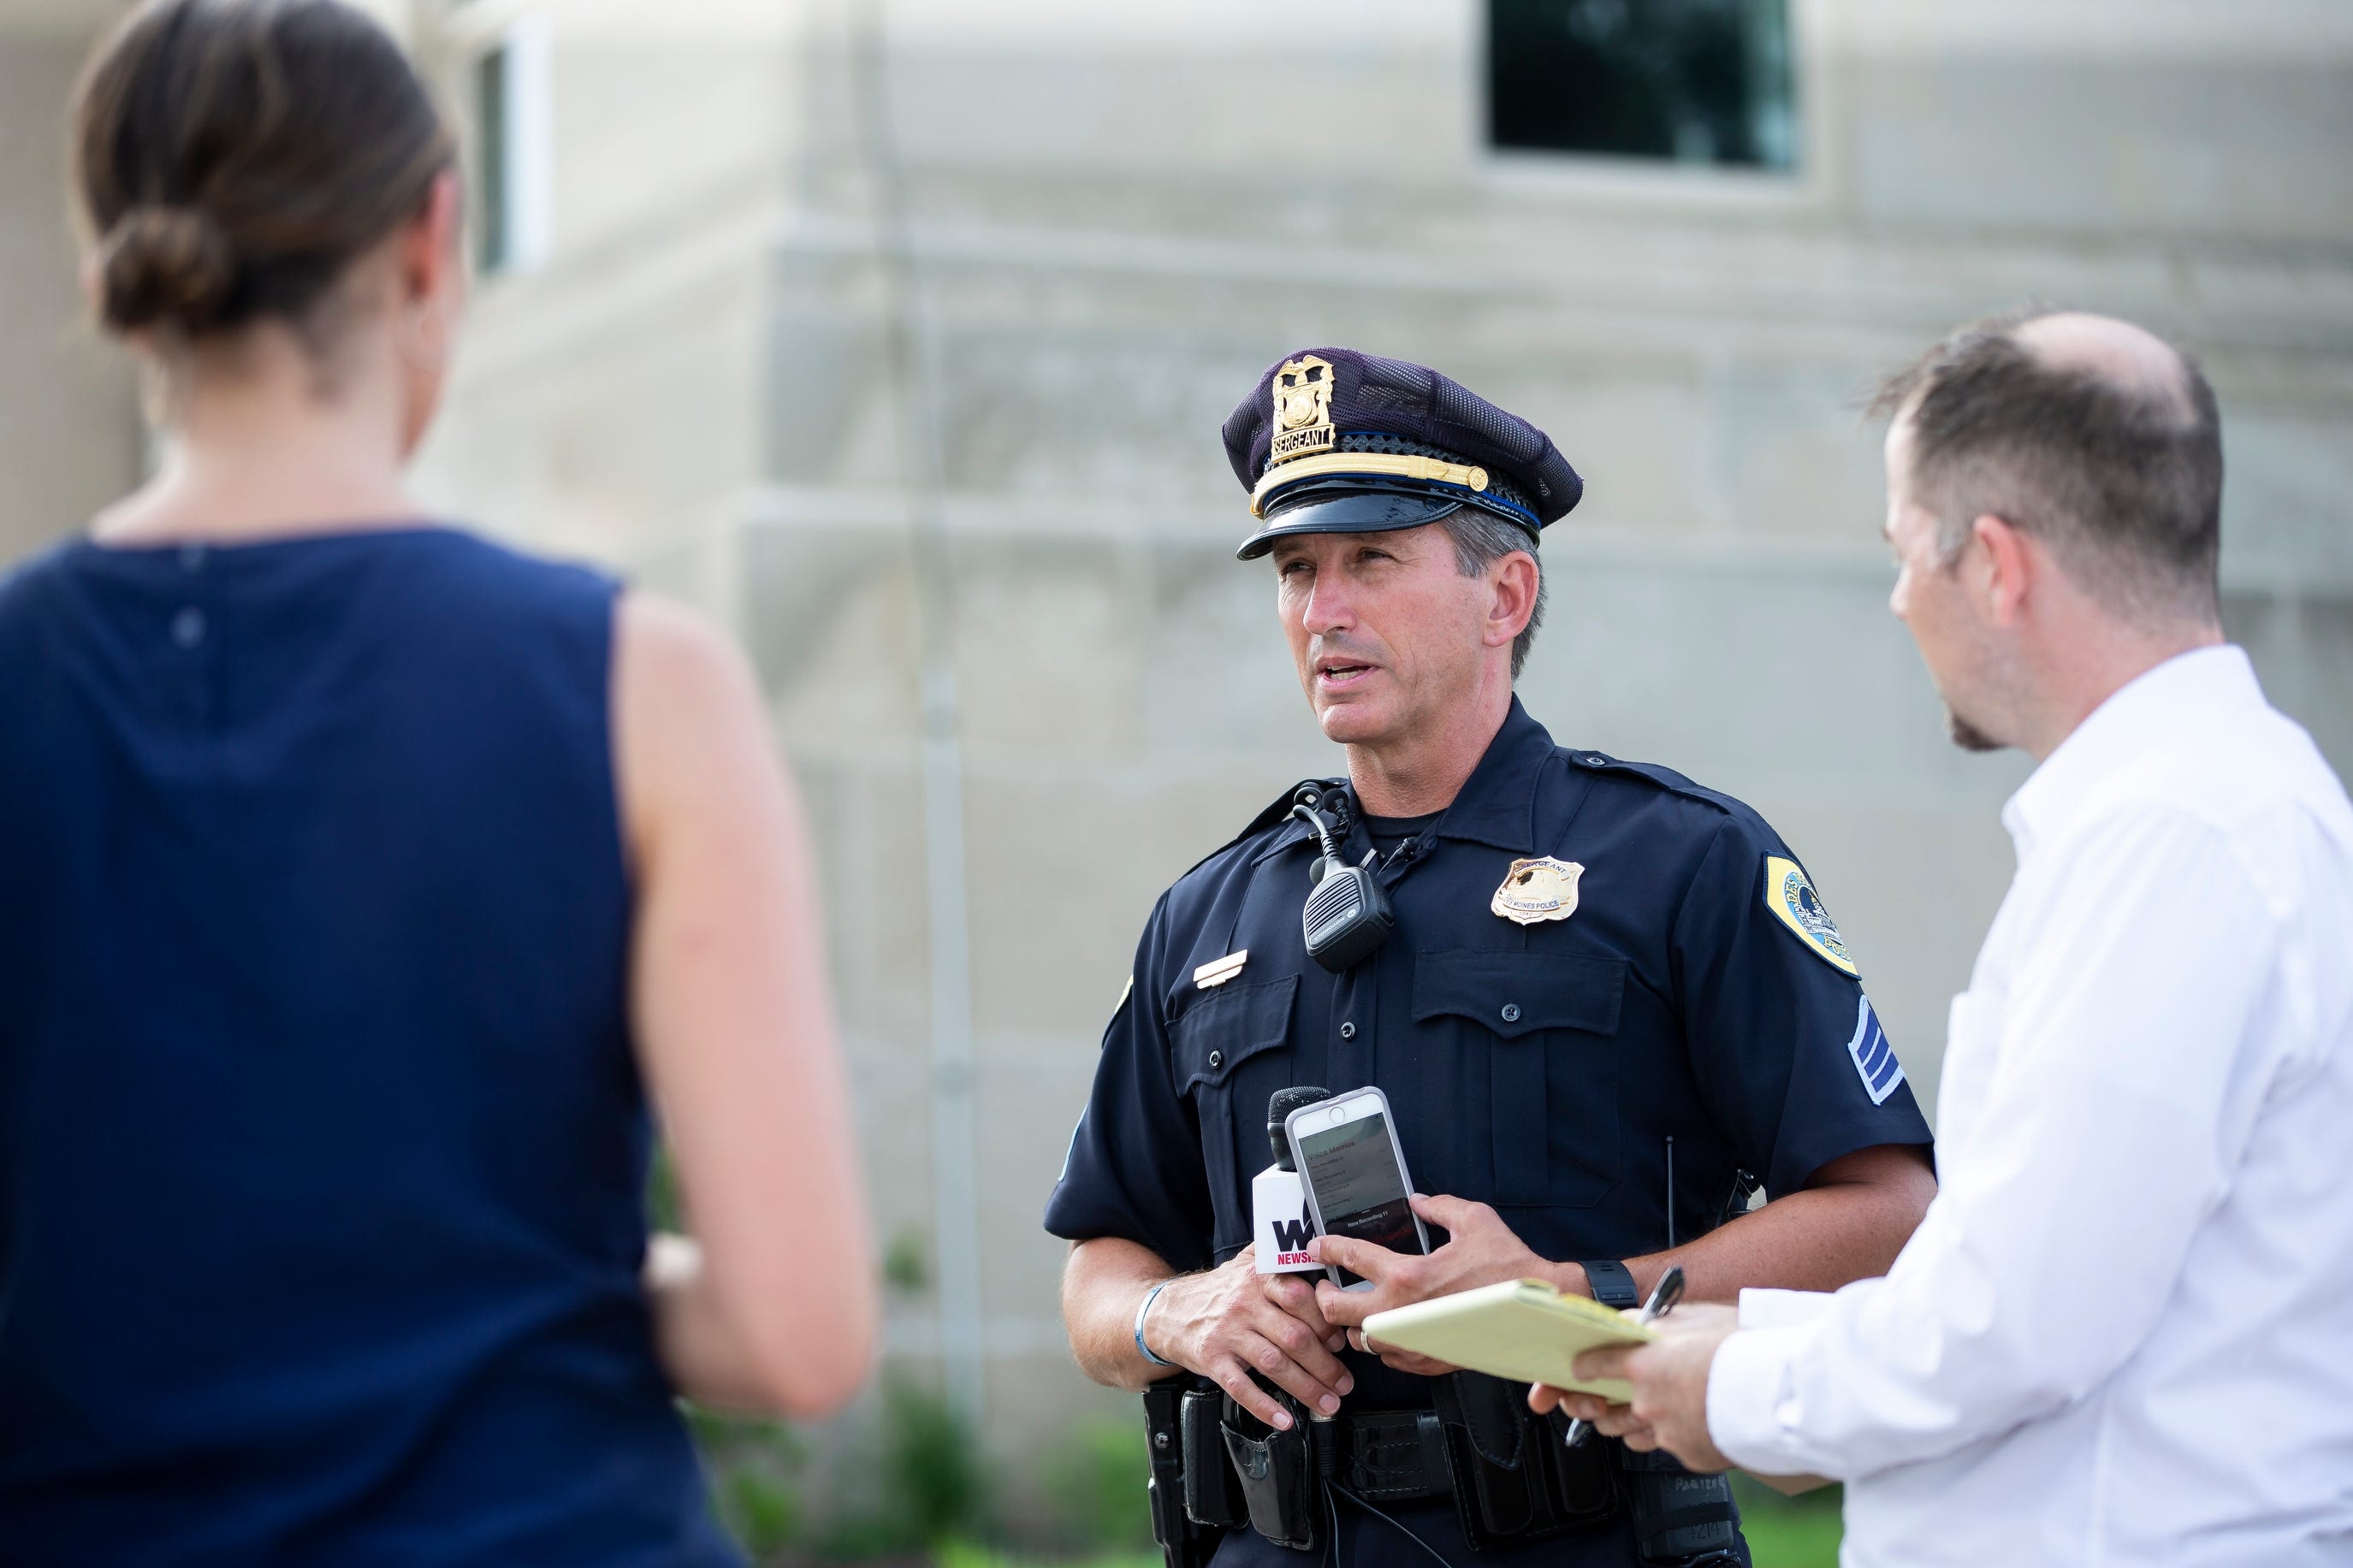 Des Moines Police Sgt. Paul Parizek addresses members of the press after Police were called to a home where three people were found dead on Wednesday, July 17, 2019, in Des Moines.